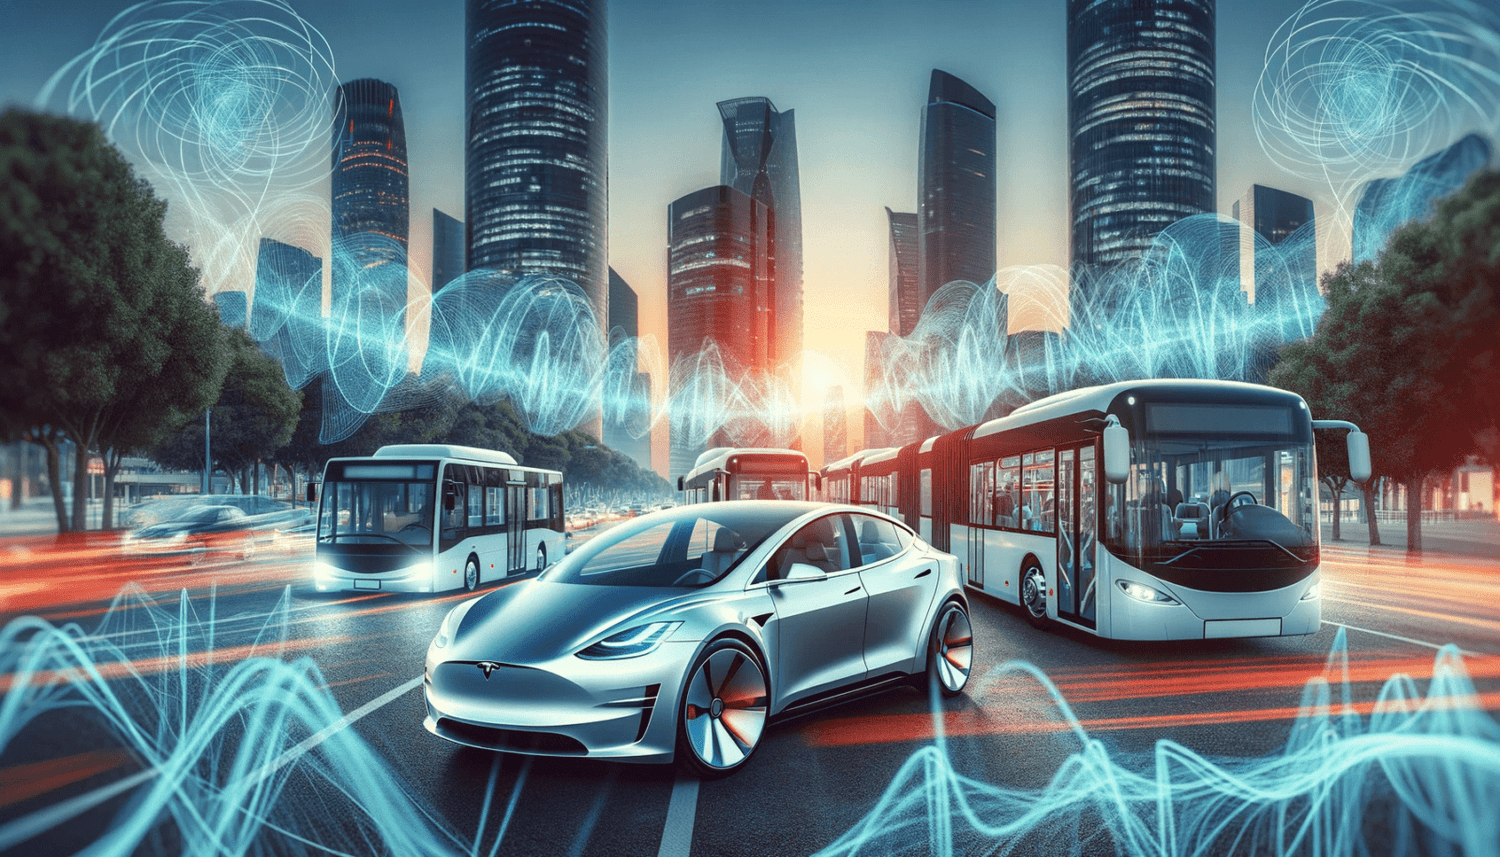 EMF in Cars: Radiation from Electric Vehicles